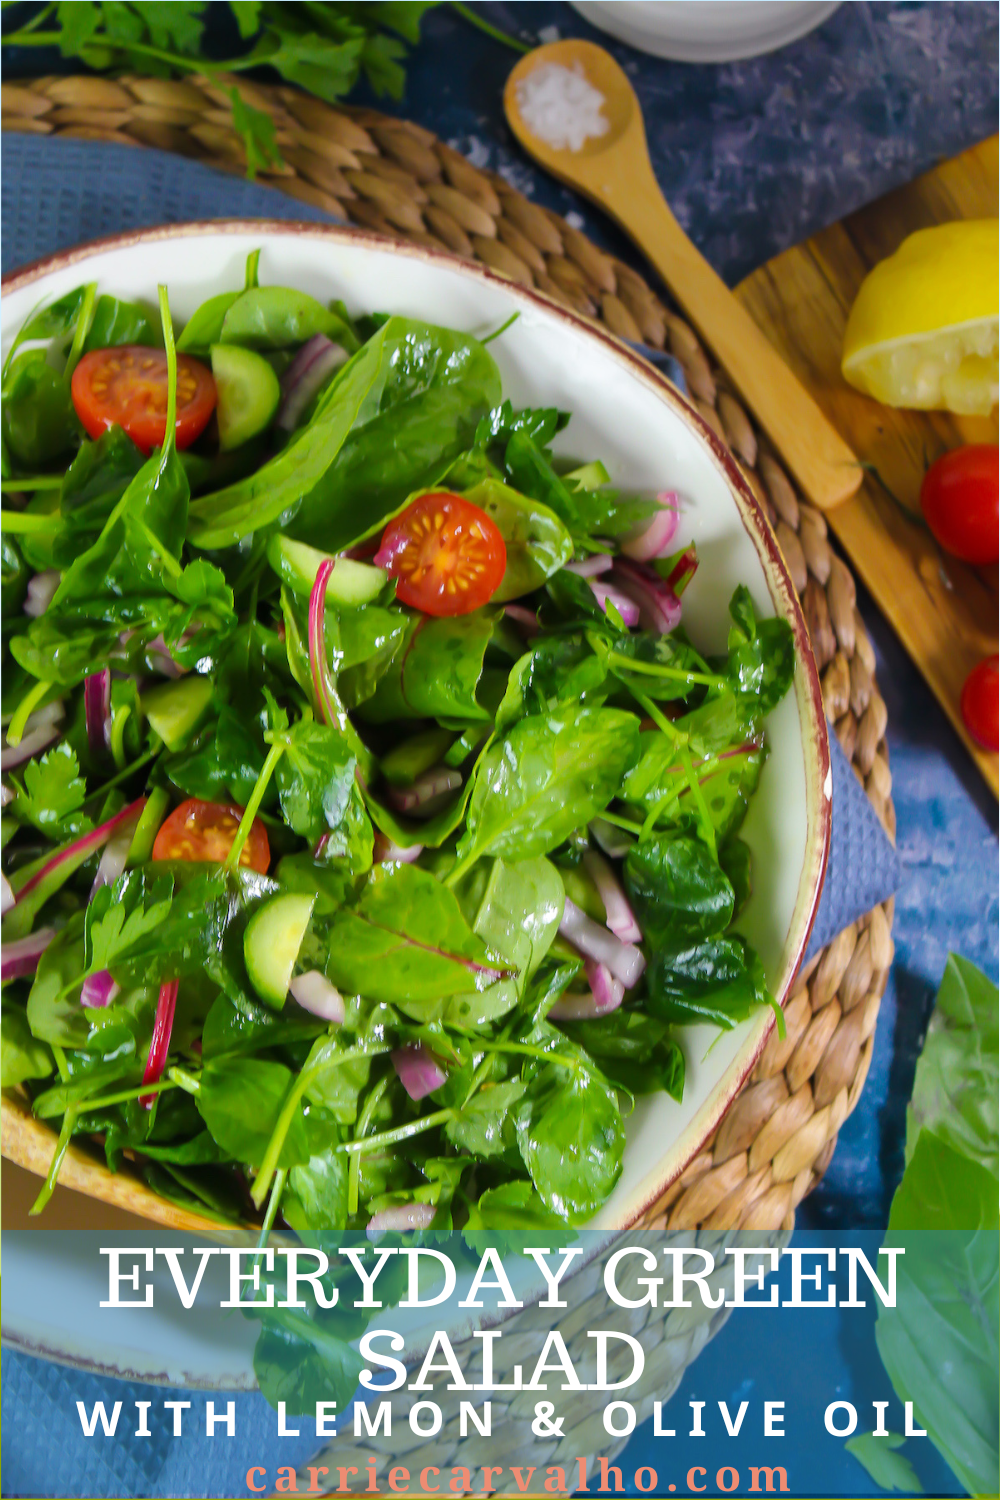 Easy Green Salad with Lemon and Olive Oil Dressing